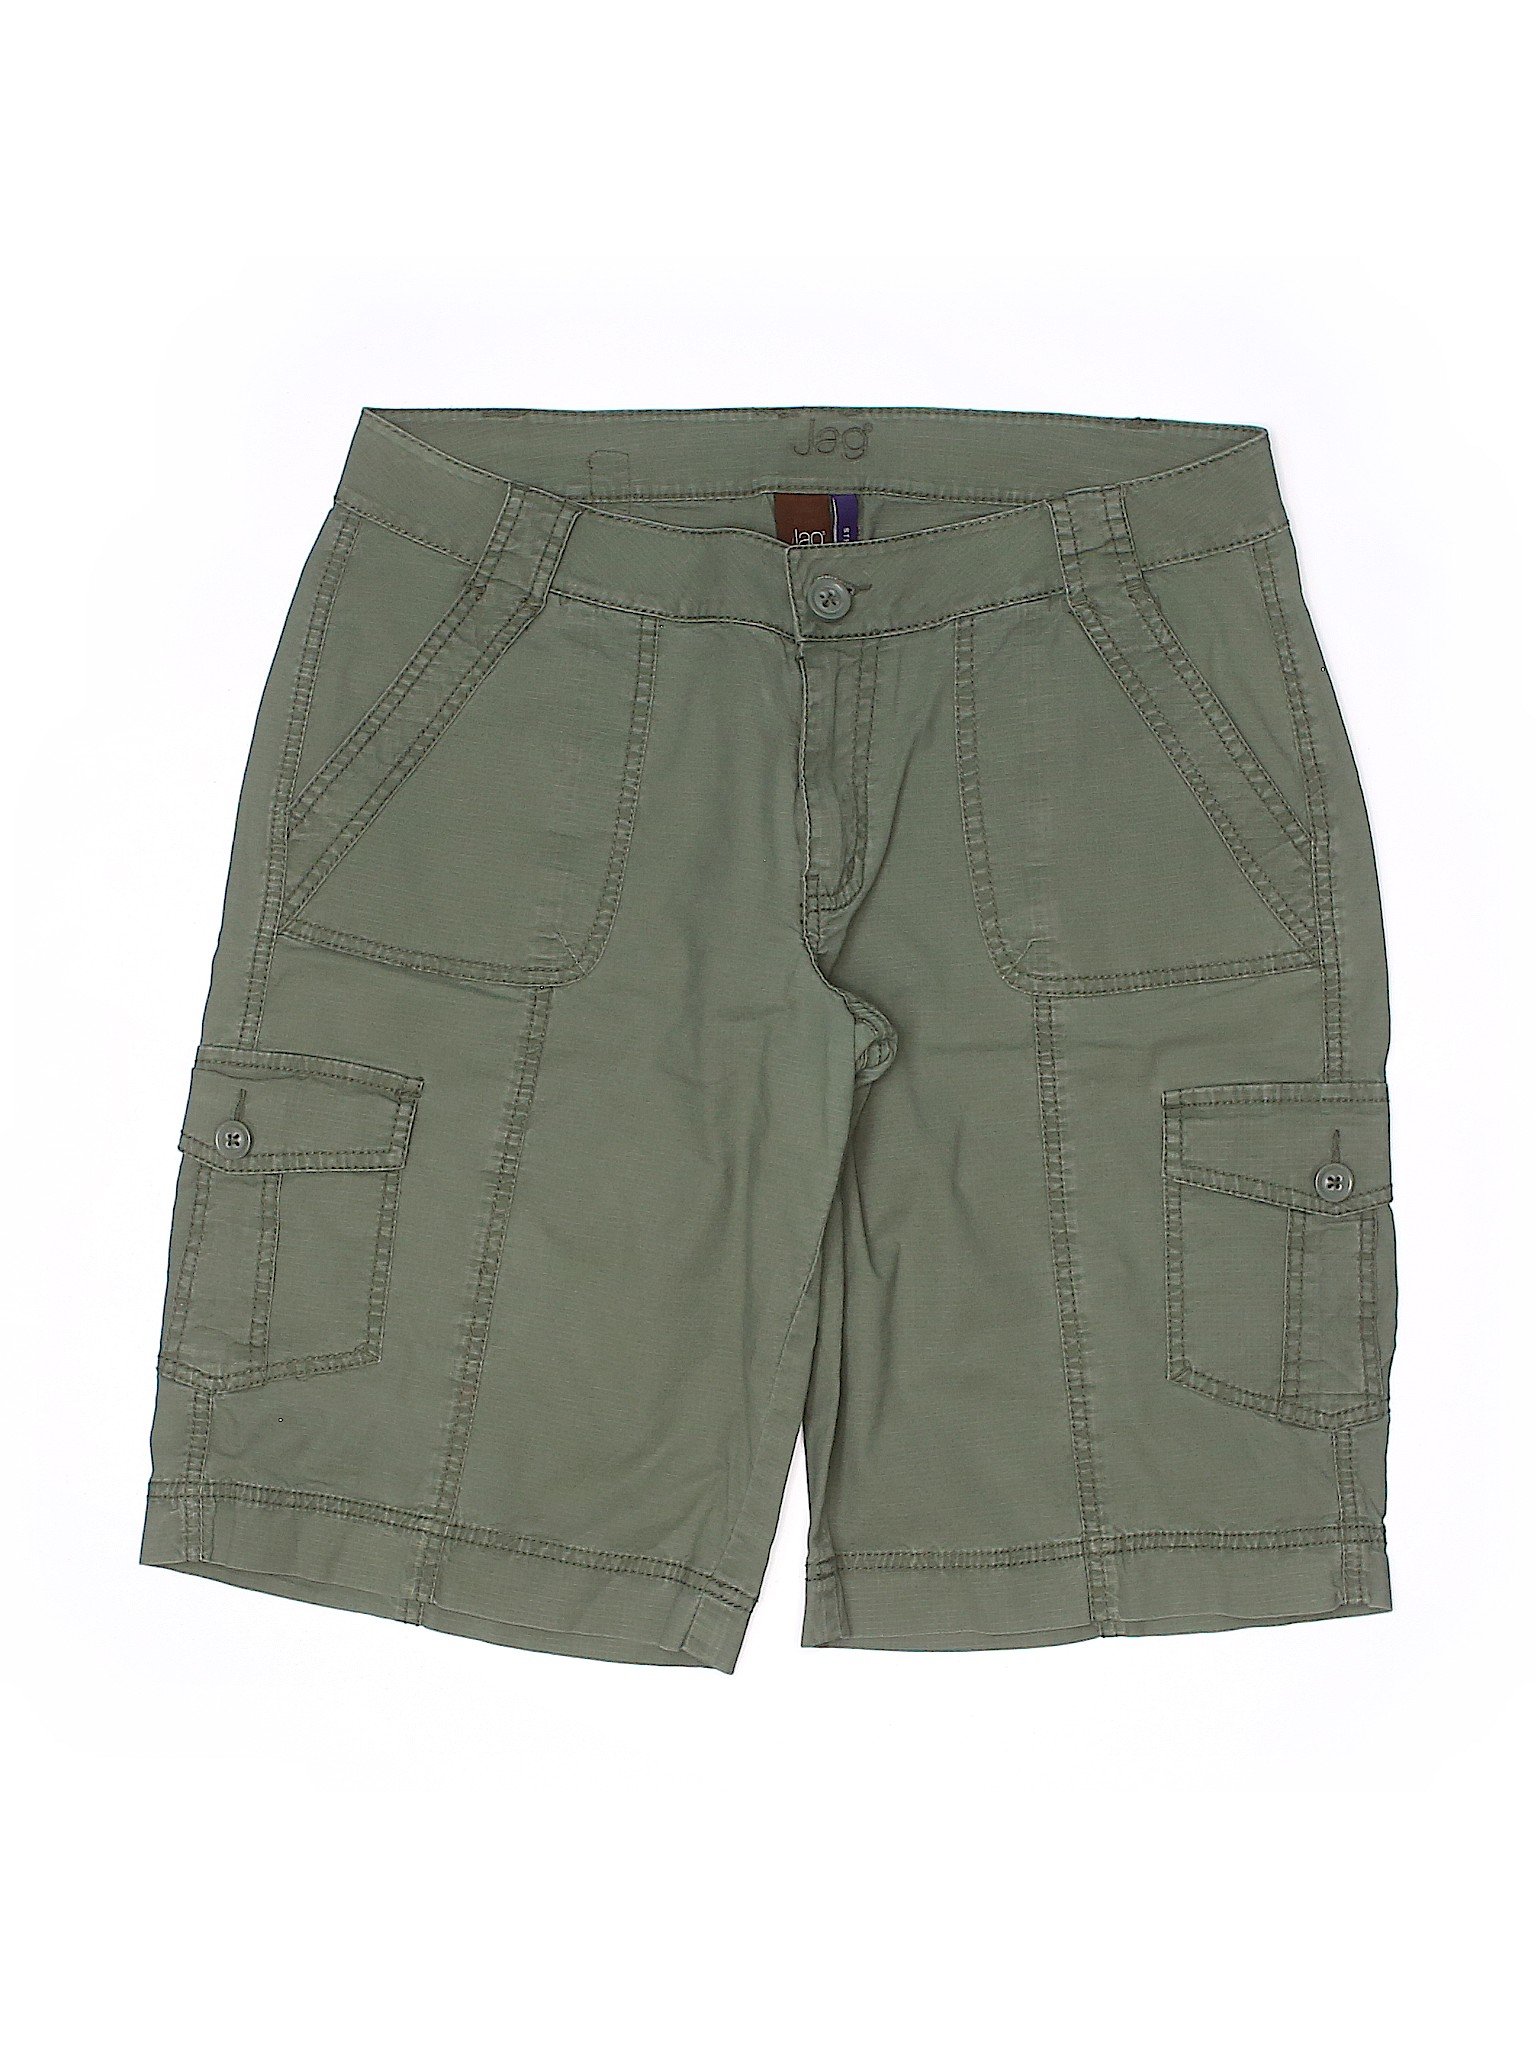 Details about Jag Women Green Cargo Shorts 12 Petite